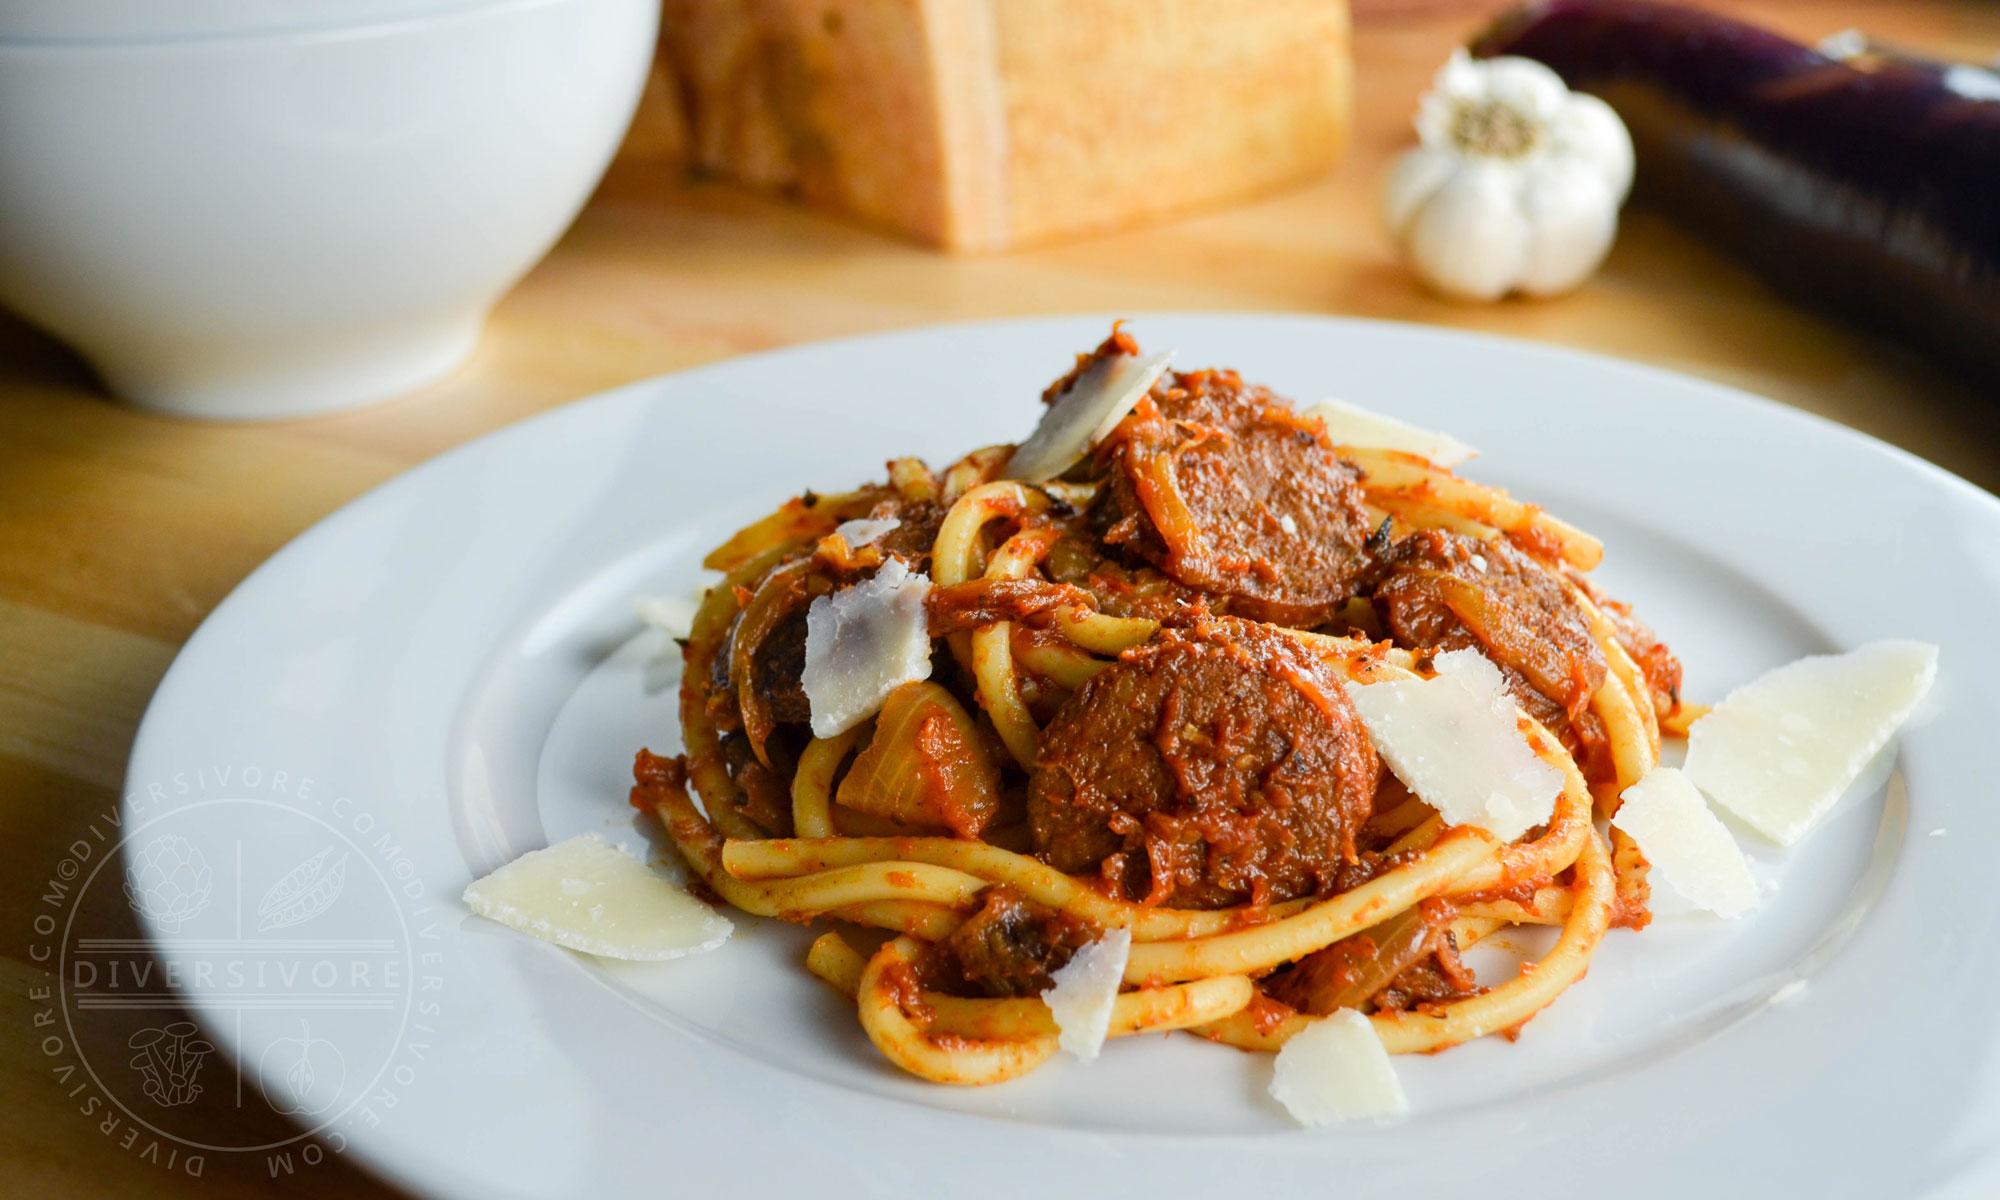 Featured image for “Sausage and Eggplant Bucatini with Fennel Tomato Sauce”